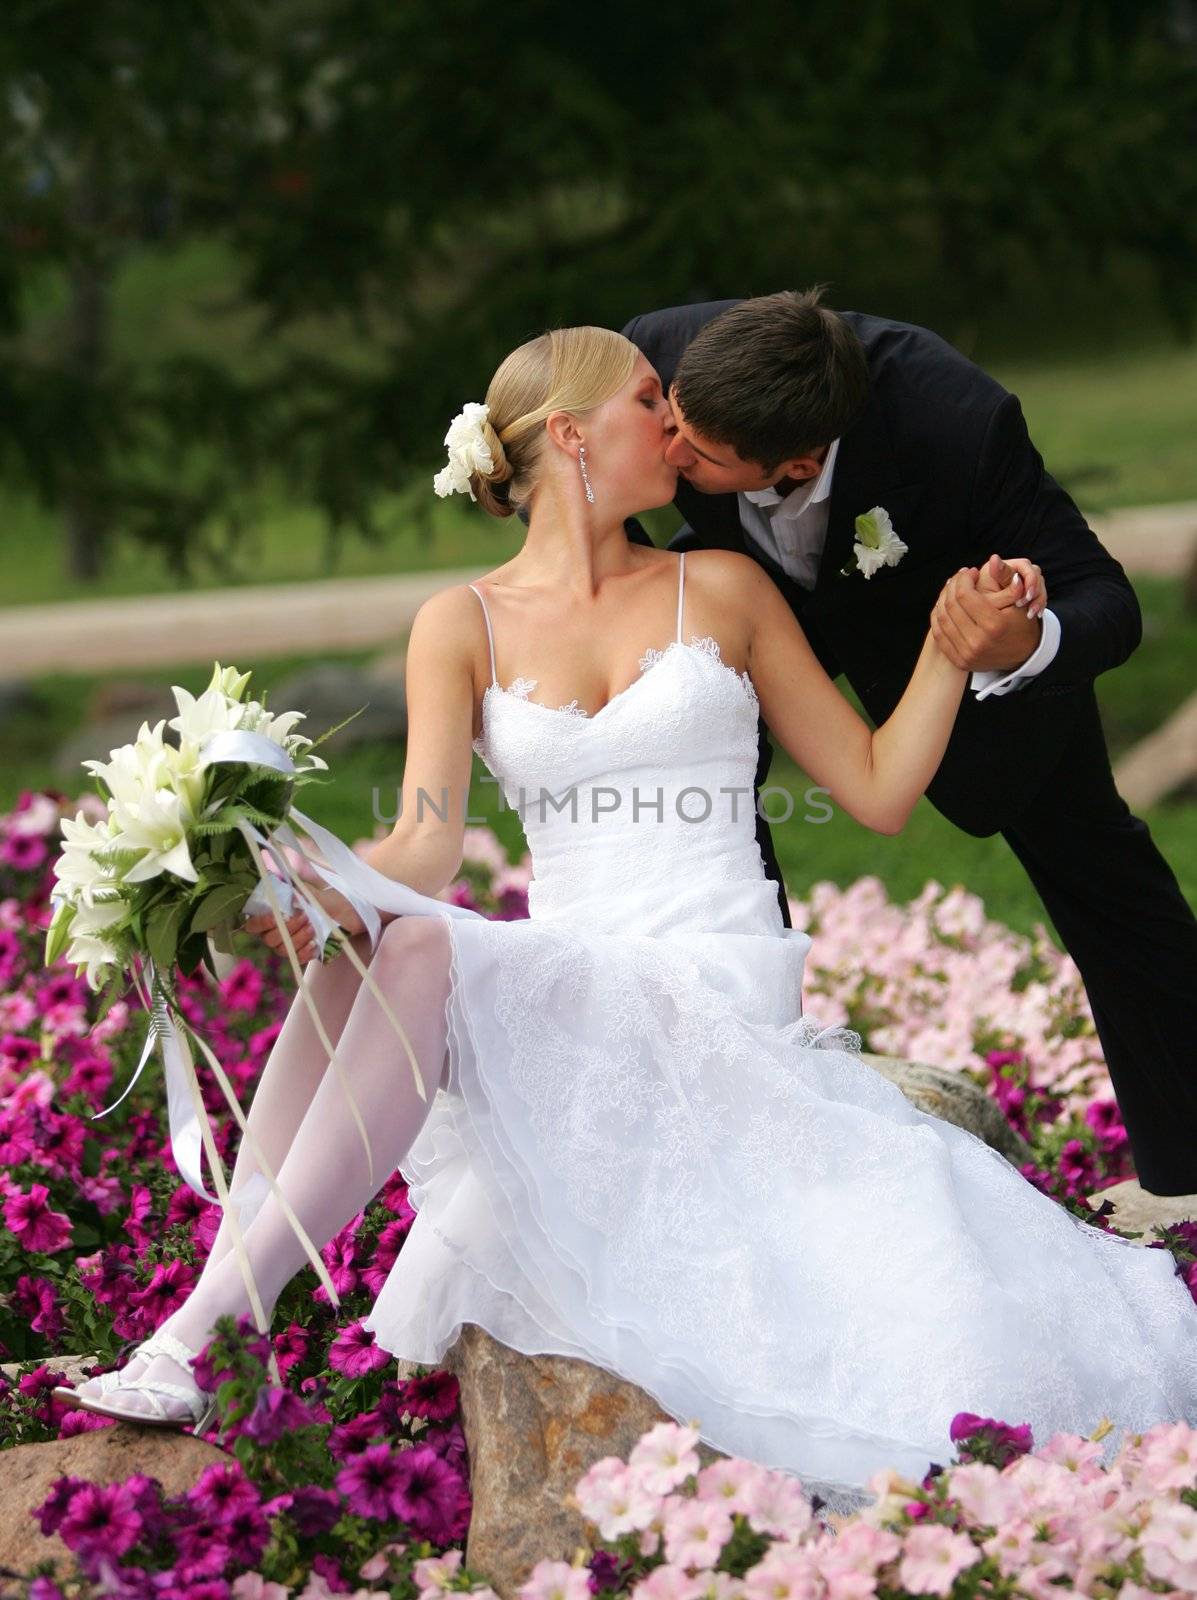 Newlywed couple kissing on flower bed in countryside.